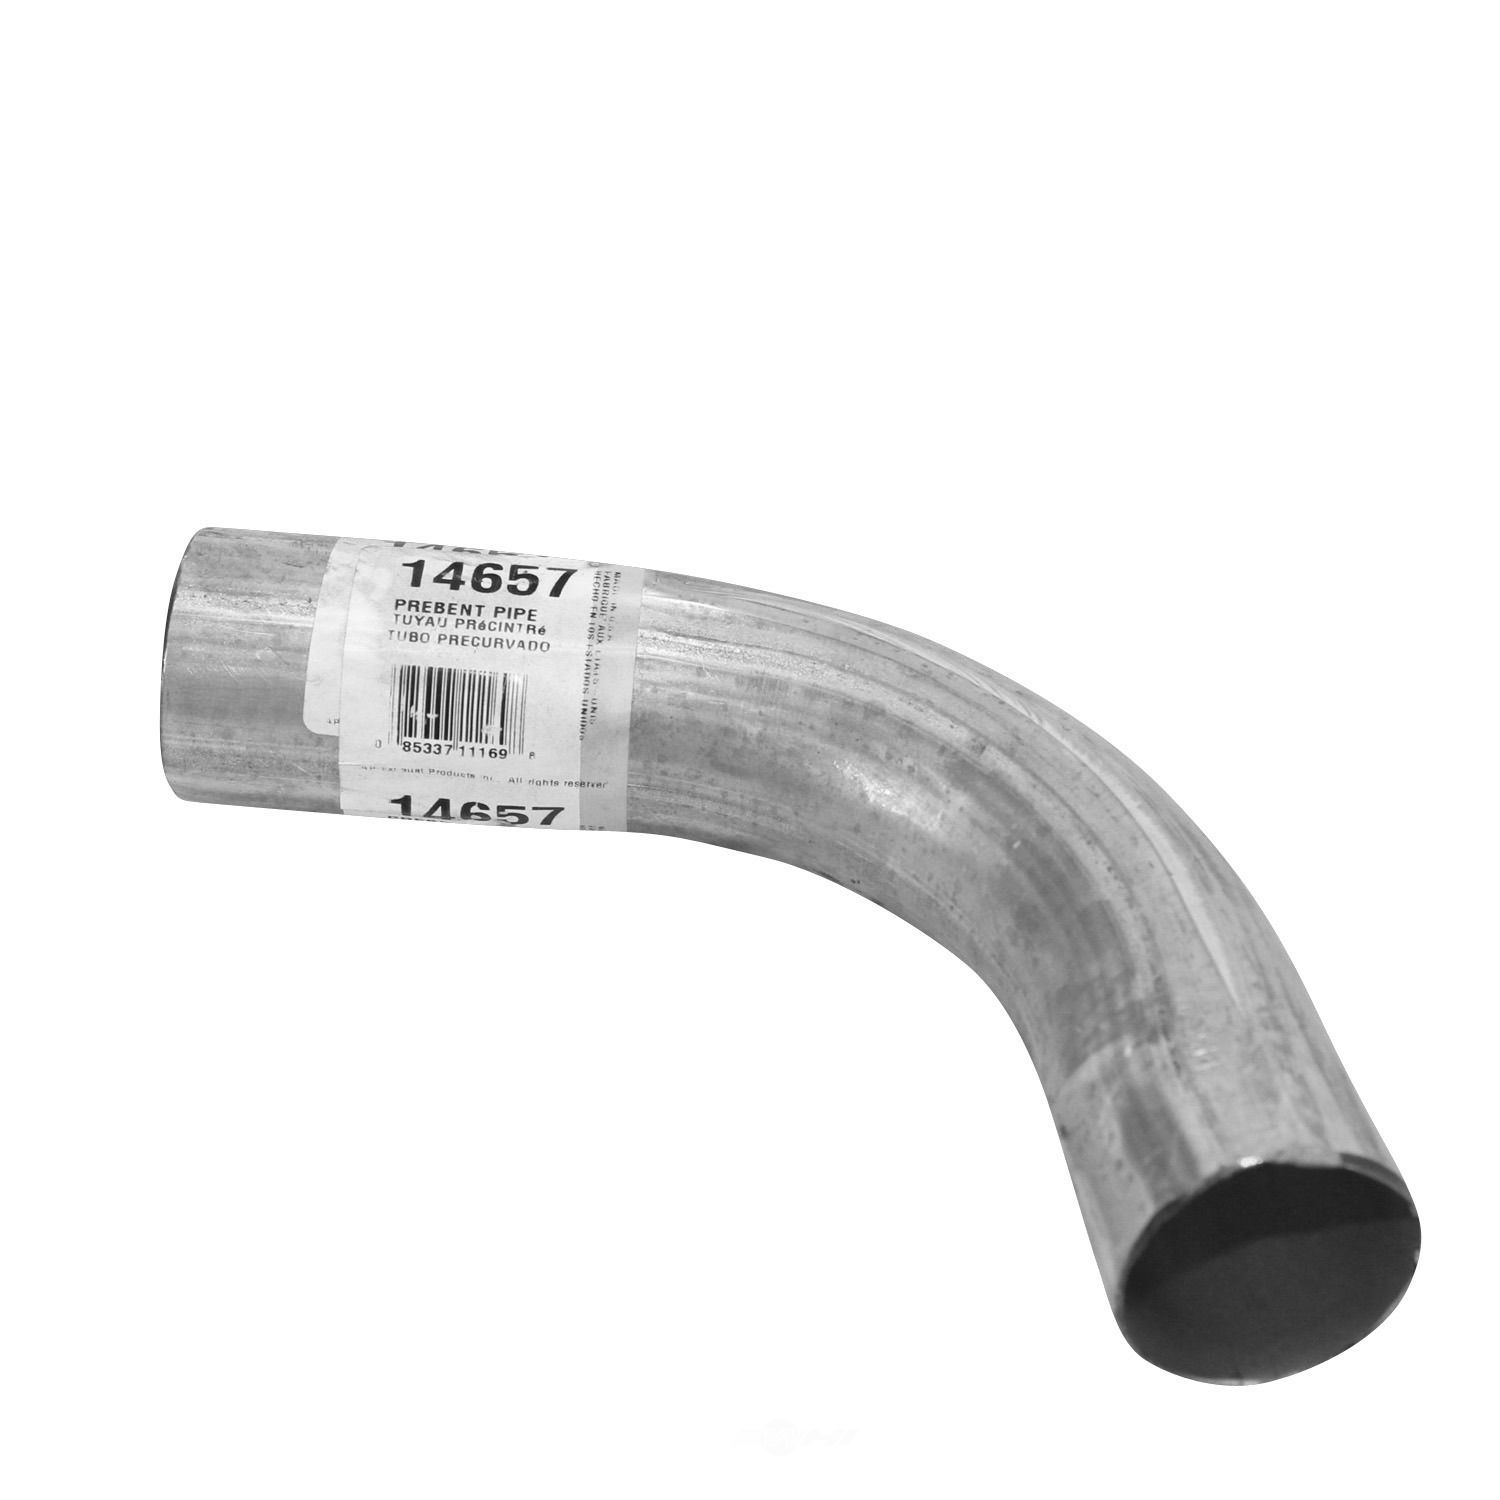 AP EXHAUST W/FEDERAL CONVERTER - Exhaust Tail Pipe - APF 14657